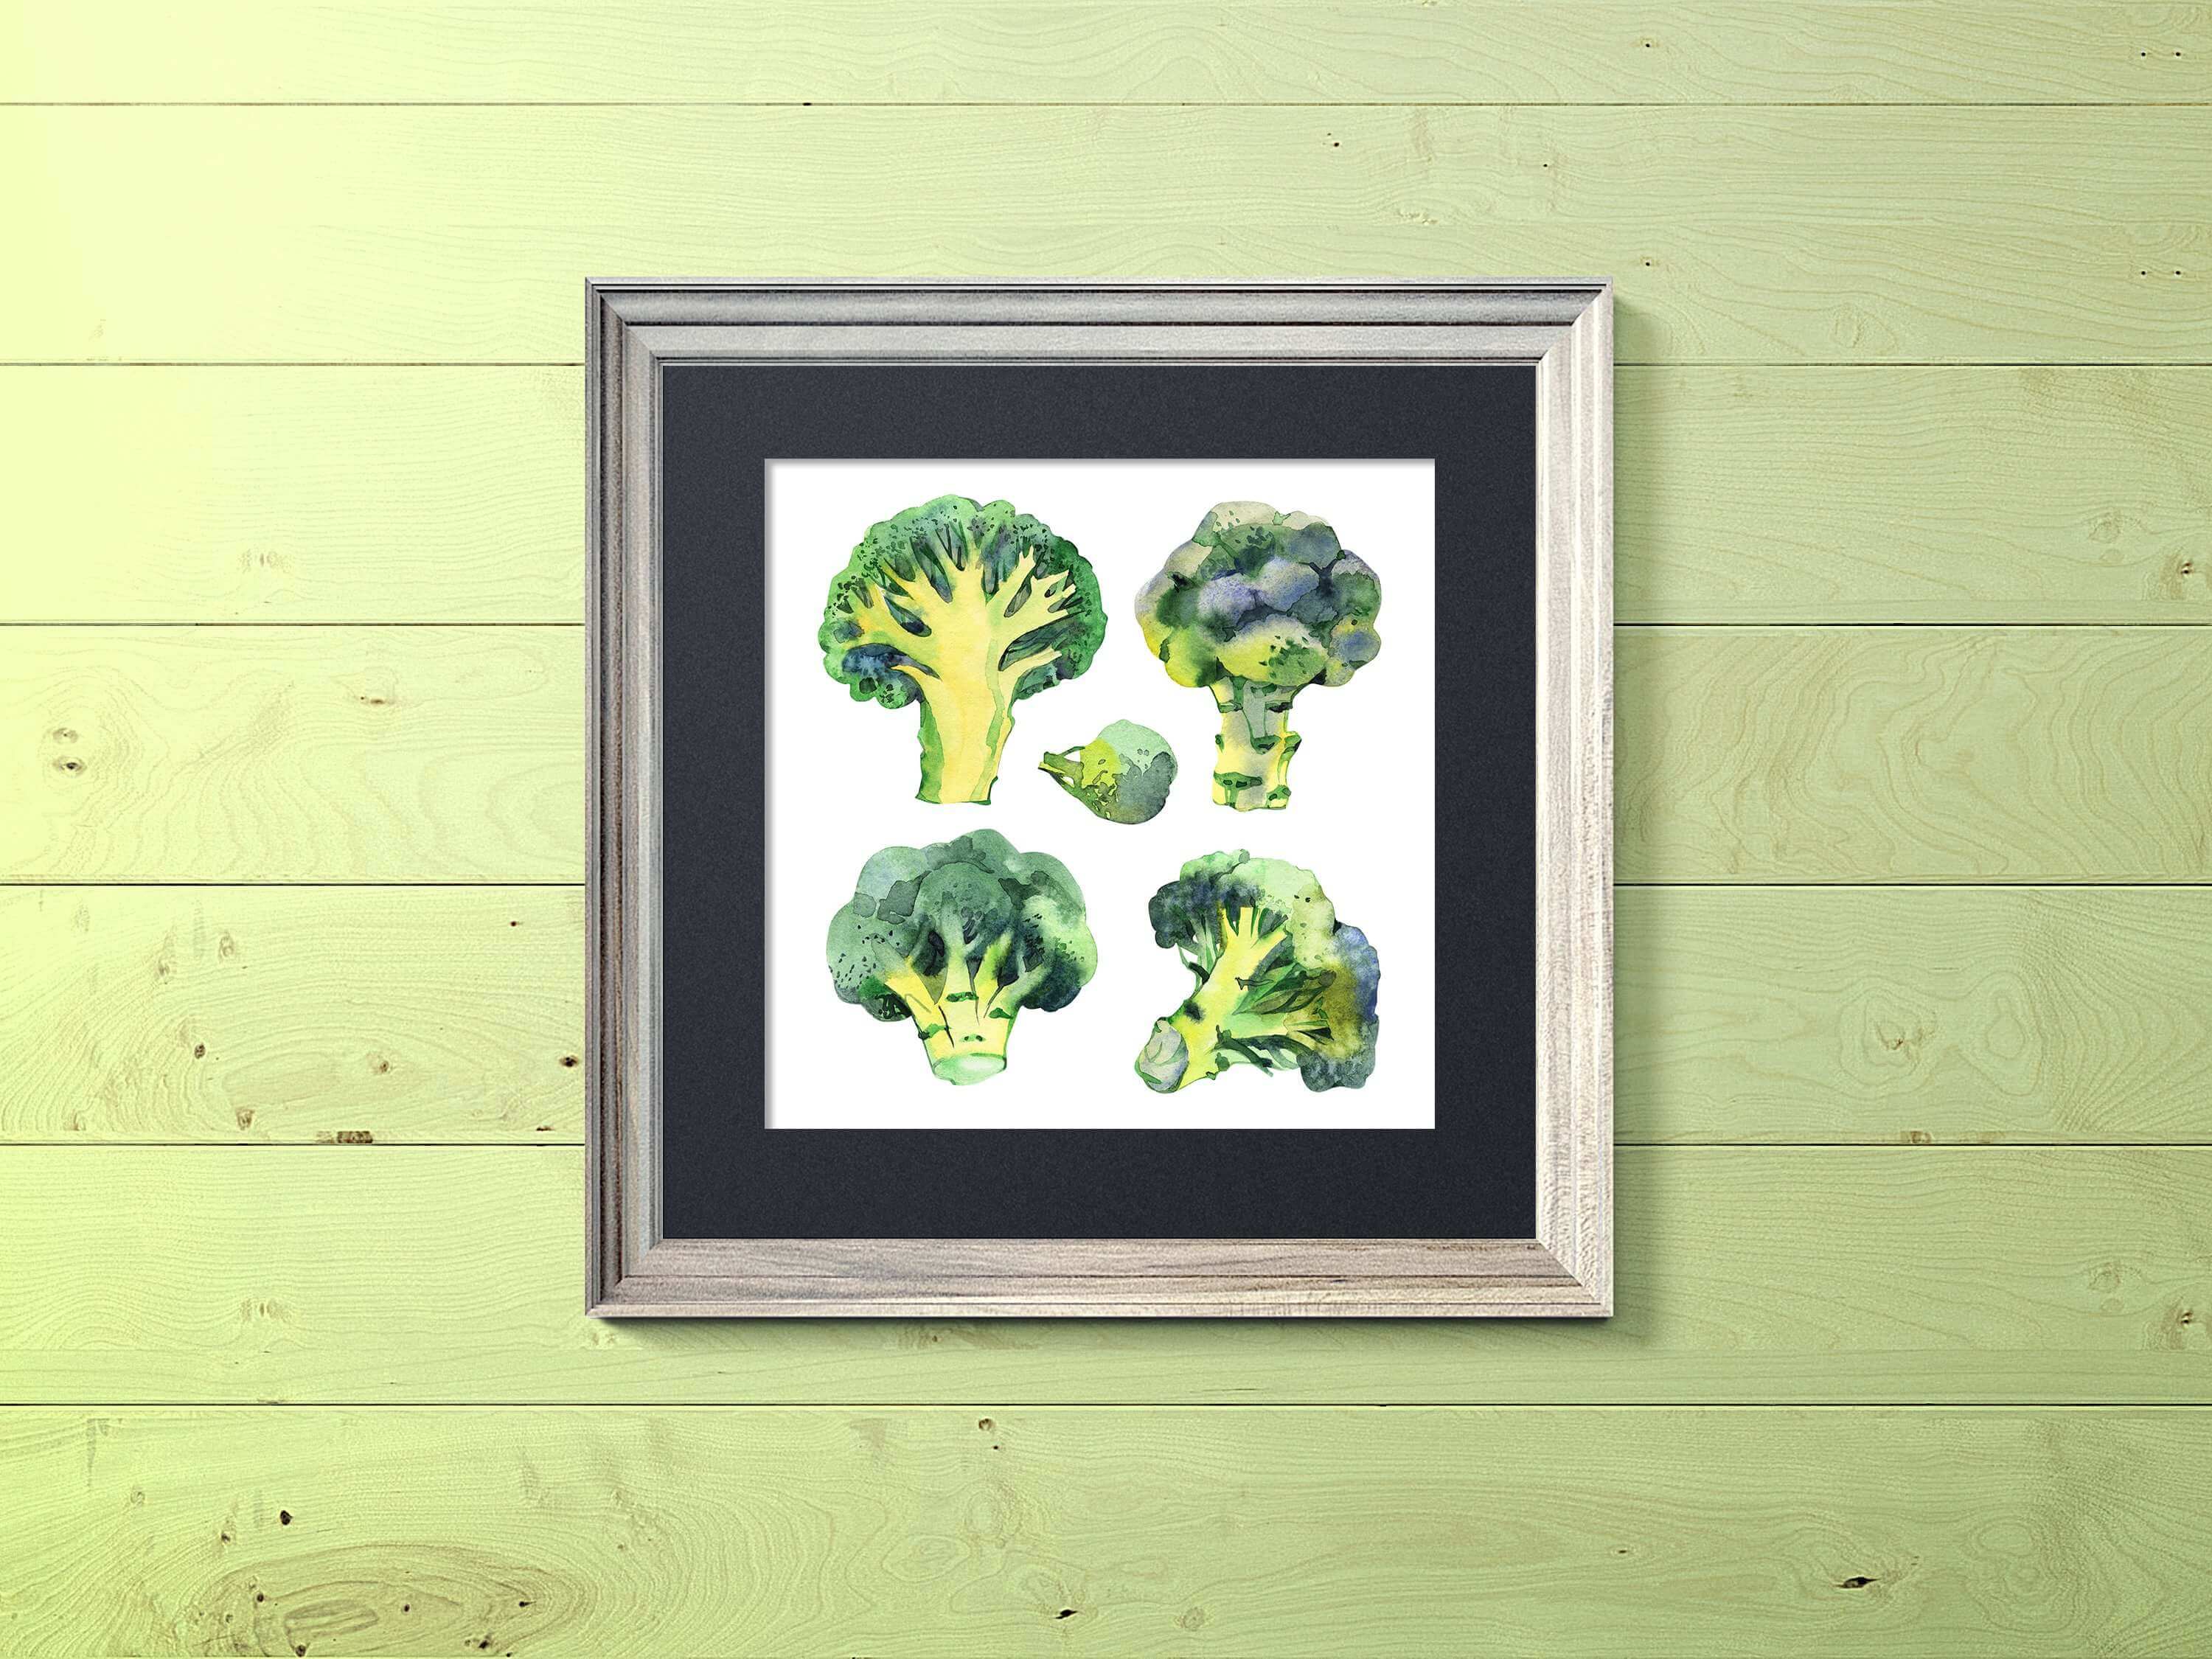 A watercolor painting of broccoli hangs on the light green wall.